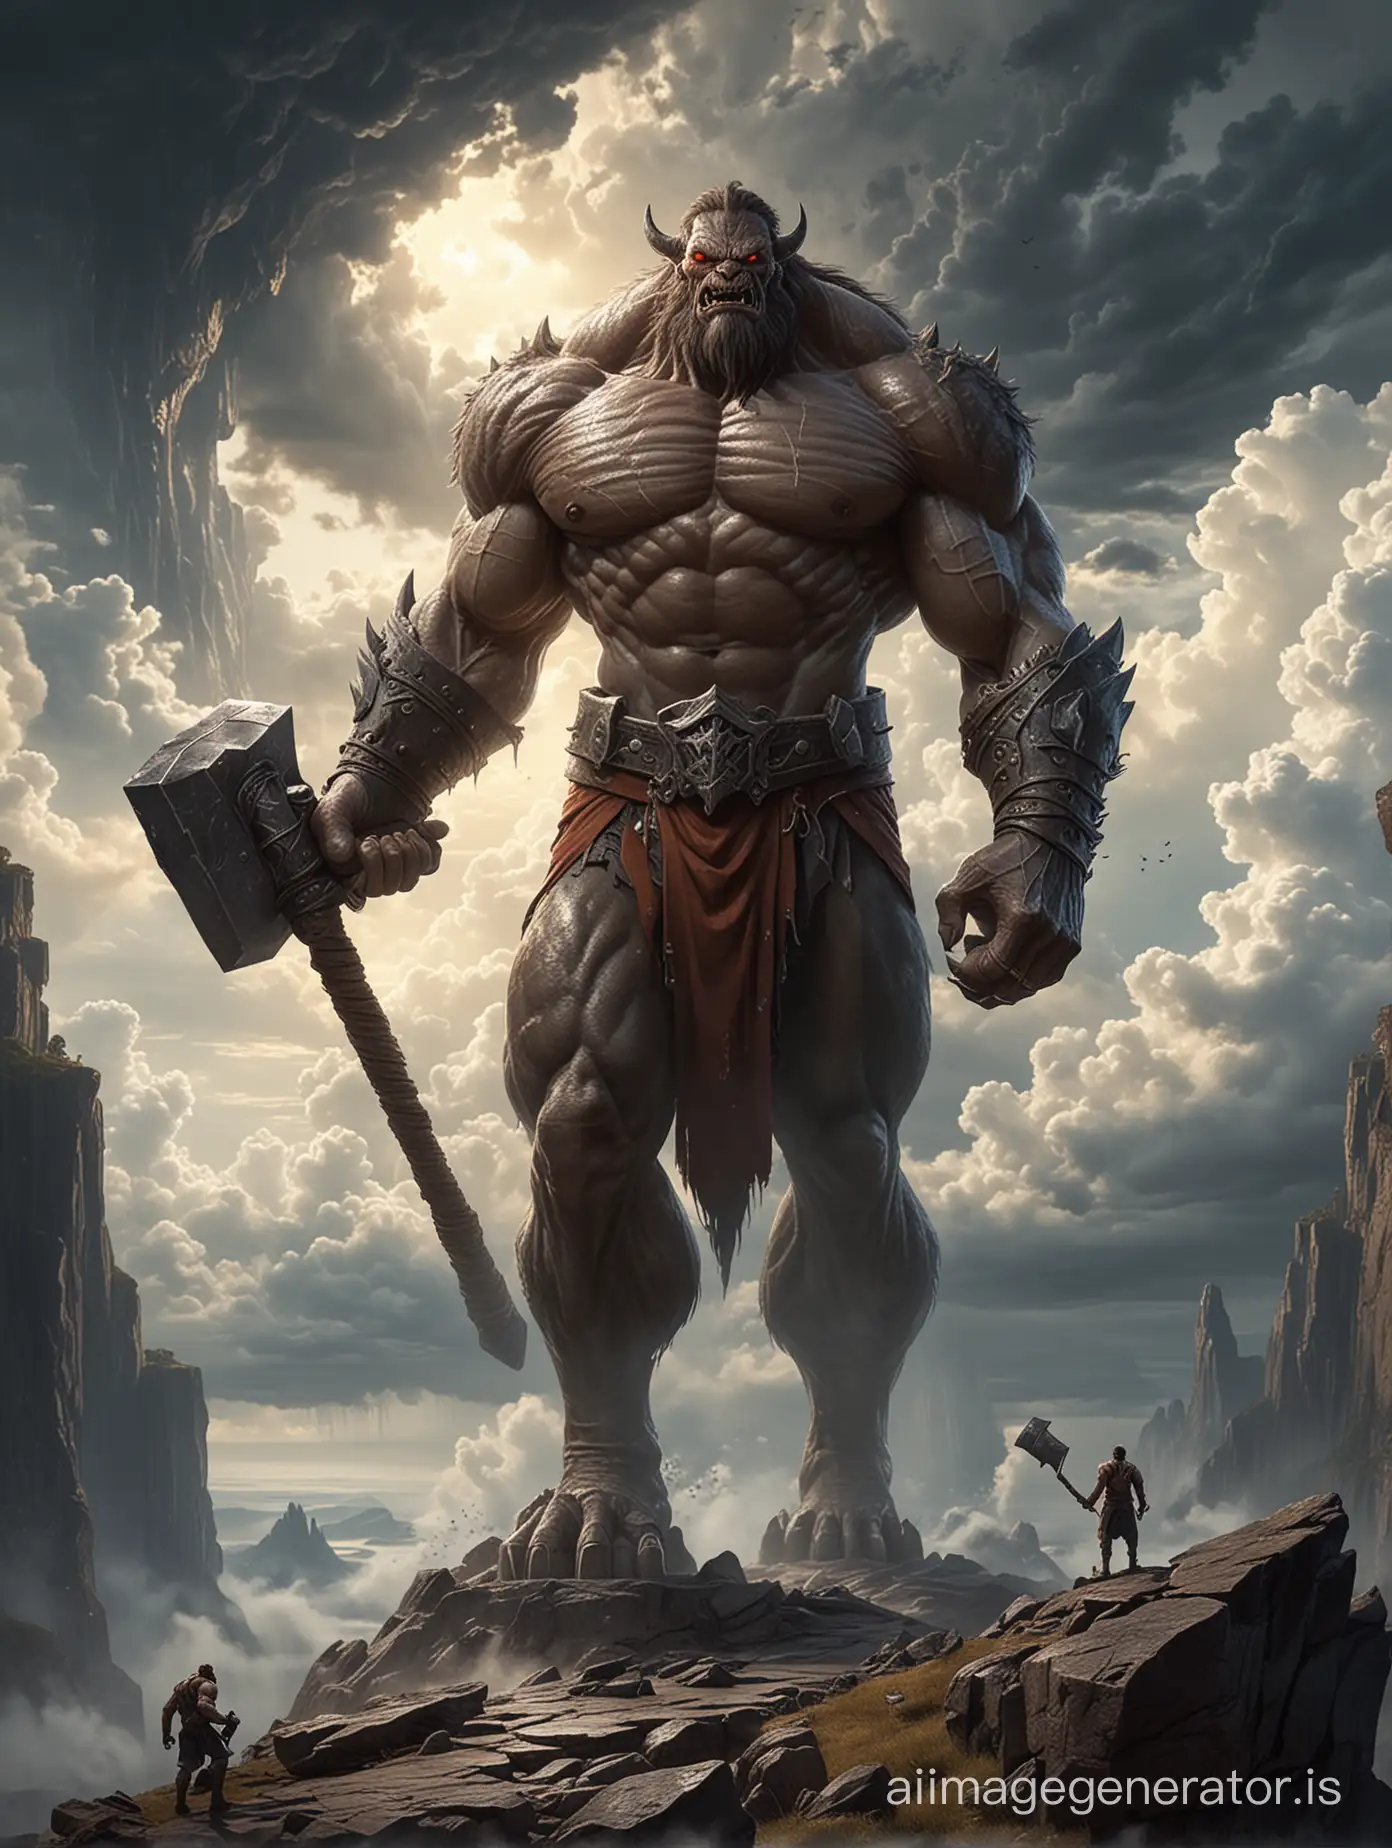 A monster carrying a large iron hammer, tall and muscular, is standing on a cloudy cliff, gallantly, in front of him there is a tiny human gaping at the scenery of clouds and the evening sun